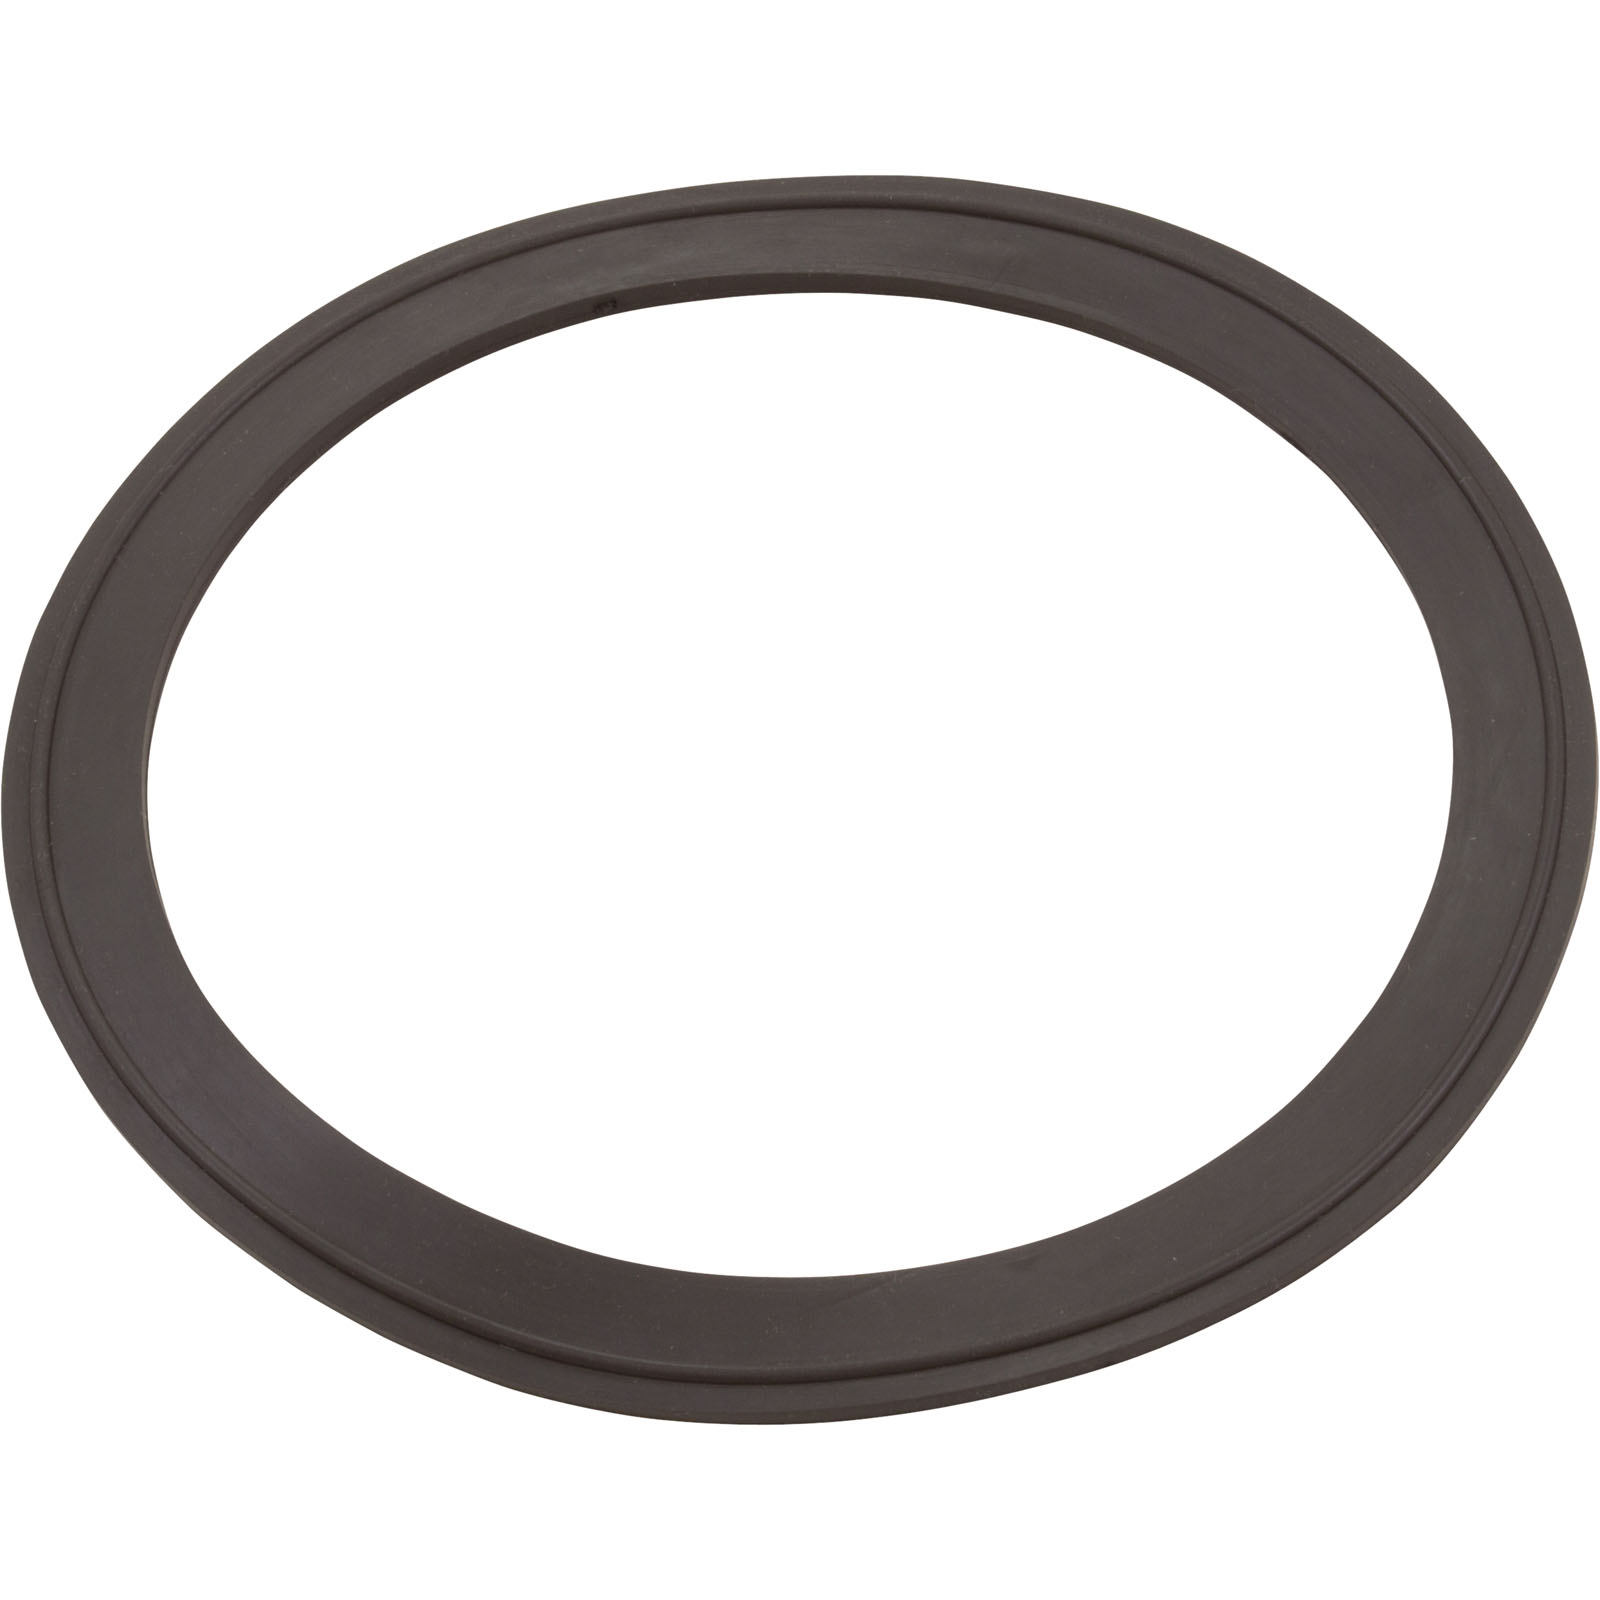 Picture of G-415 Gasket Aladdin Clamp Ring 5-3/4